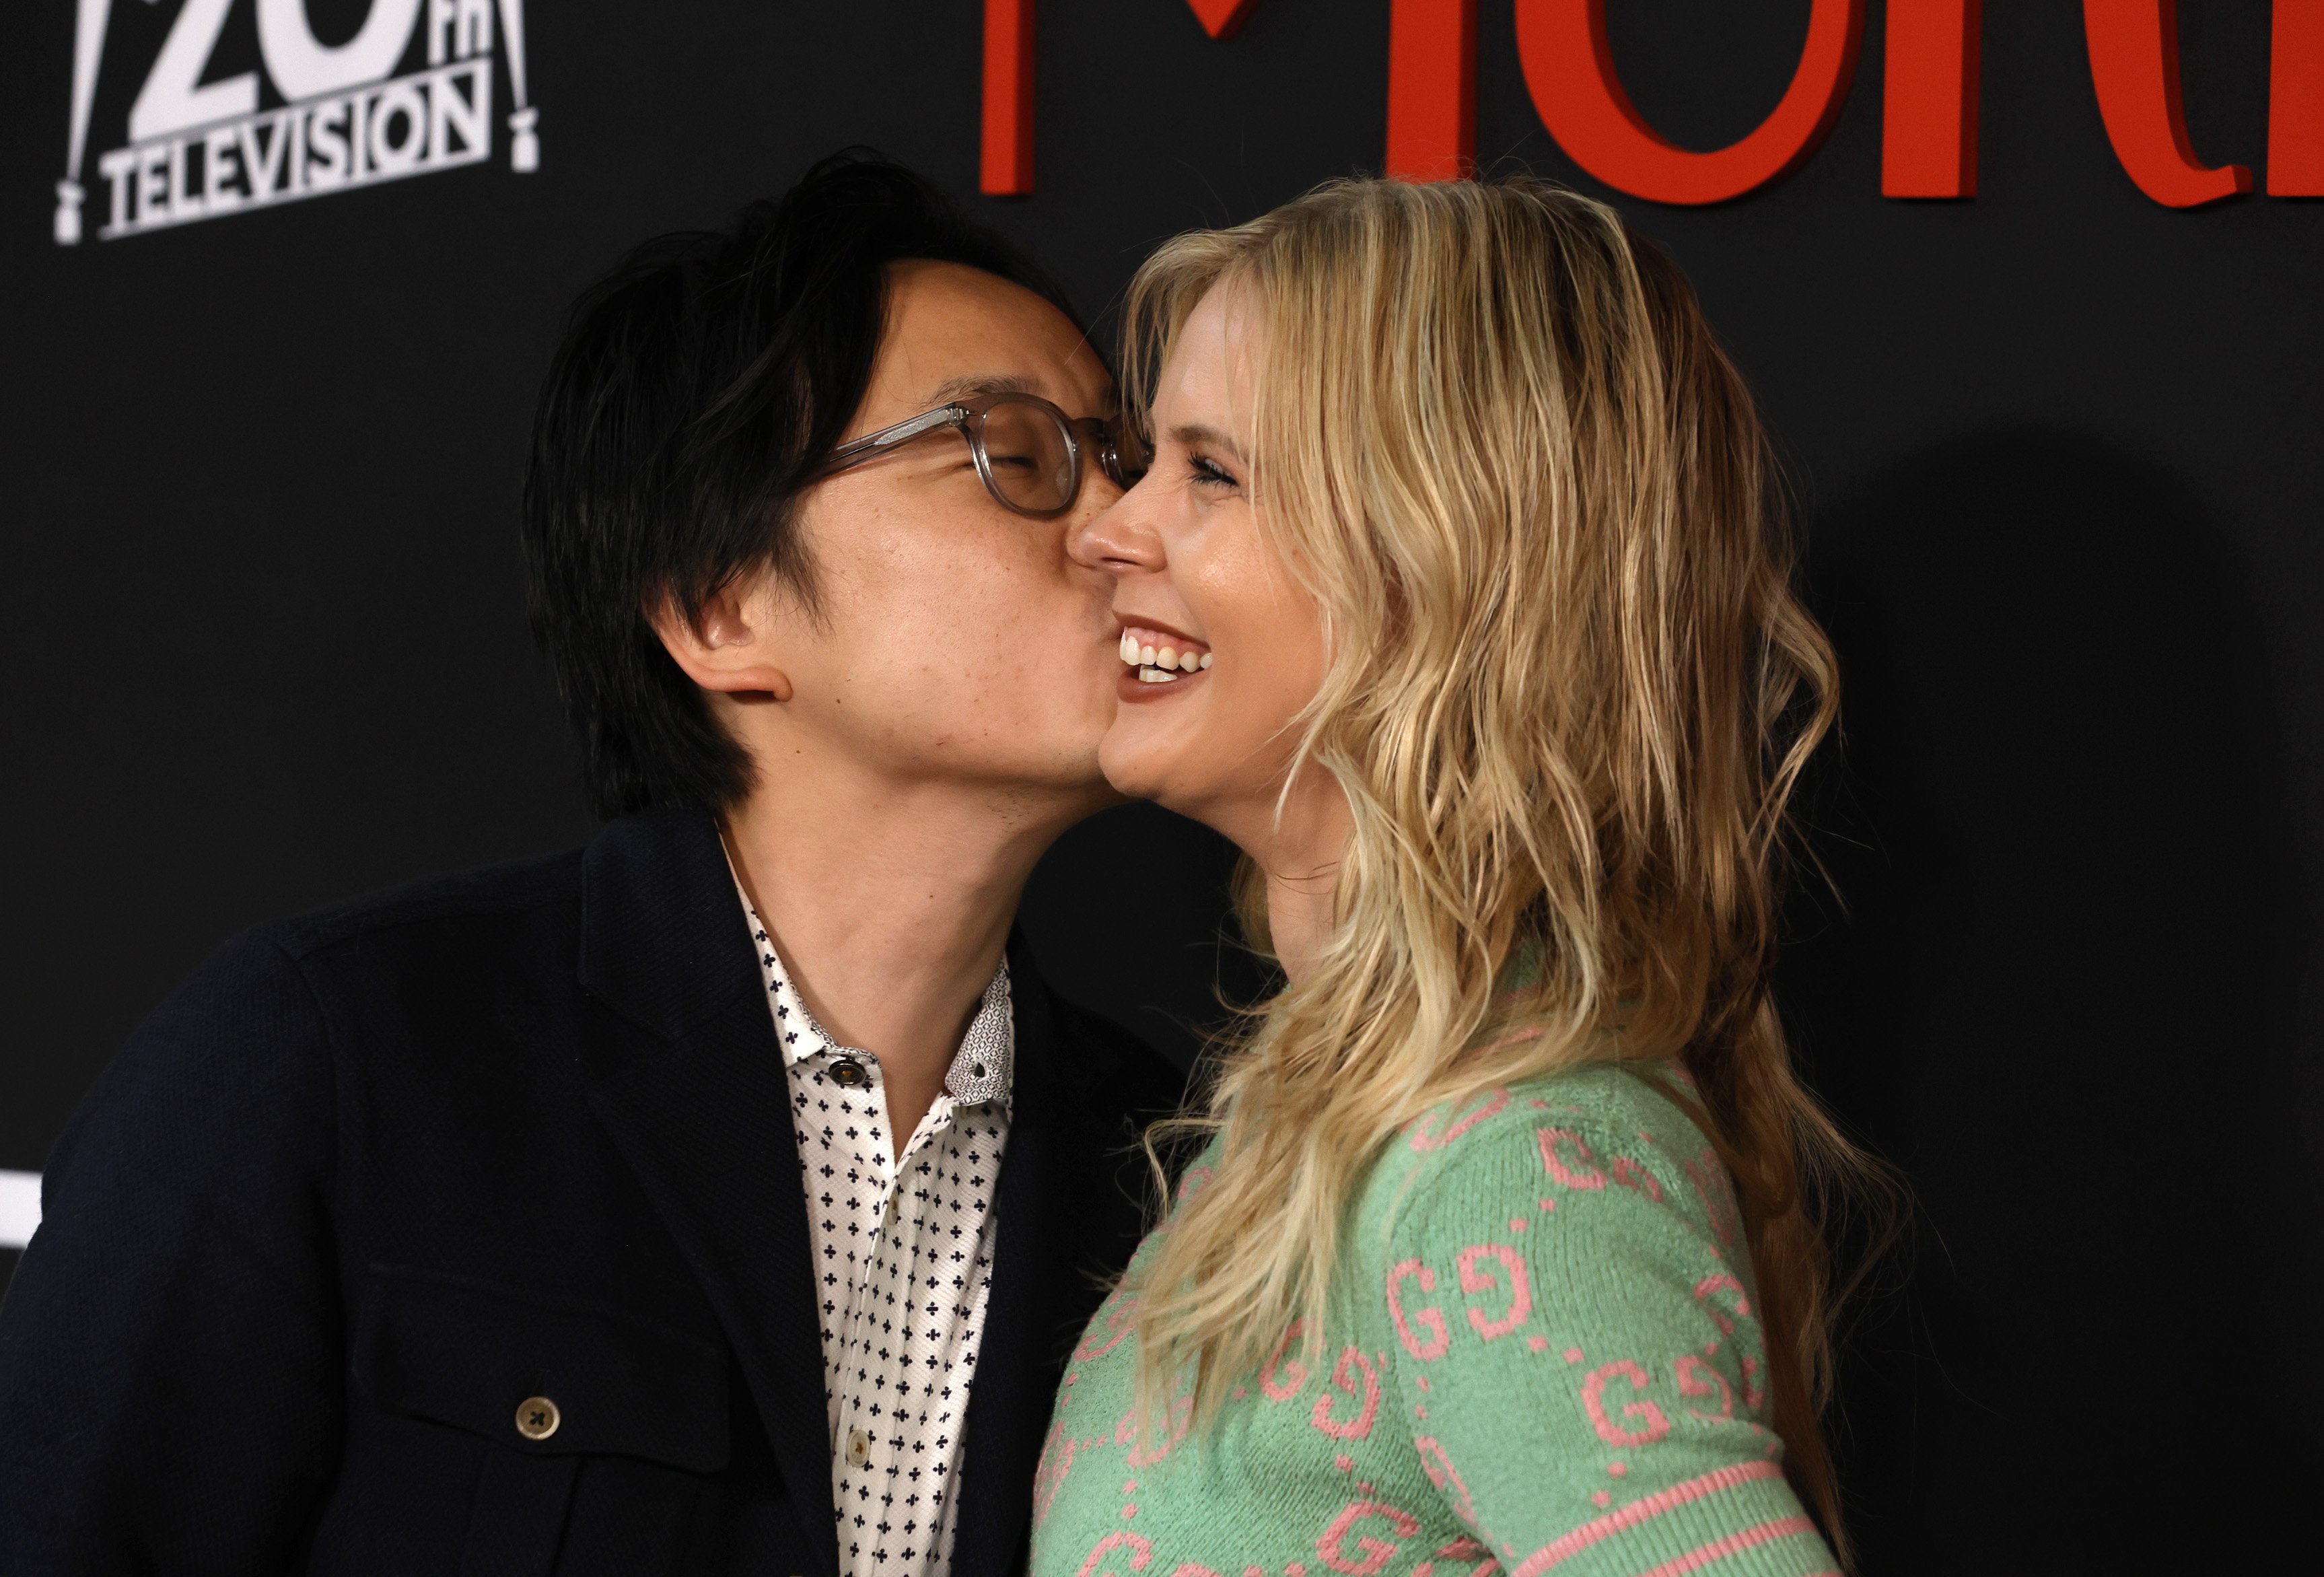 Jimmy O. Yang and Bri Kimmel at the "Only Murders In The Building" Season 2 premiere at DGA Theater Complex in Los Angeles, California, on June 27, 2022. | Source: Getty Images